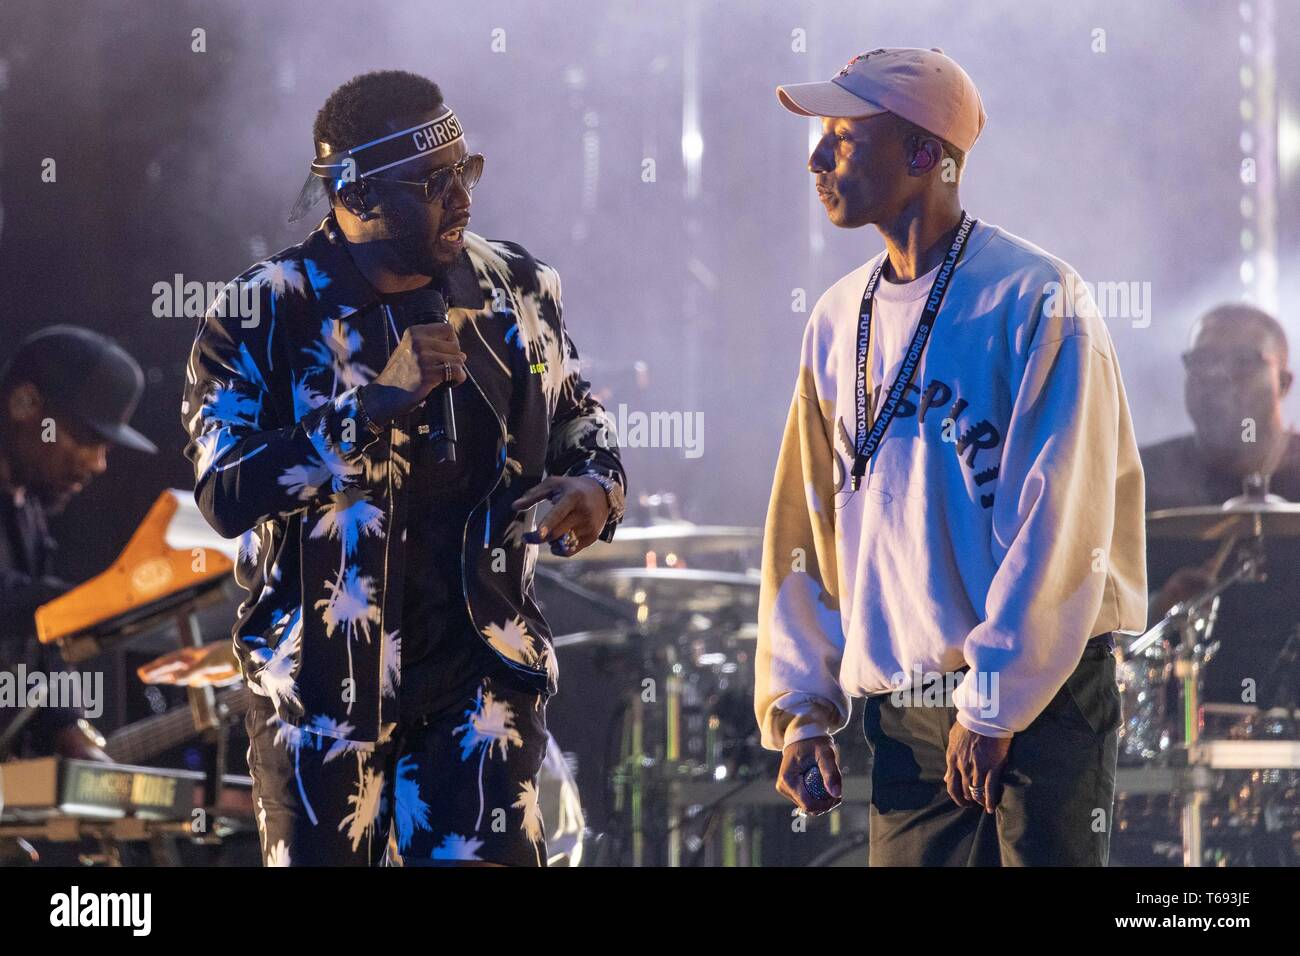 April 27, 2019 - Virginia Beach, Virginia, U.S - DIDDY (SEAN COMBS) and PHARRELL WILLIAMS during the inaugural Something In The Water Music Festival in Virginia Beach, Virginia (Credit Image: © Daniel DeSlover/ZUMA Wire) Stock Photo